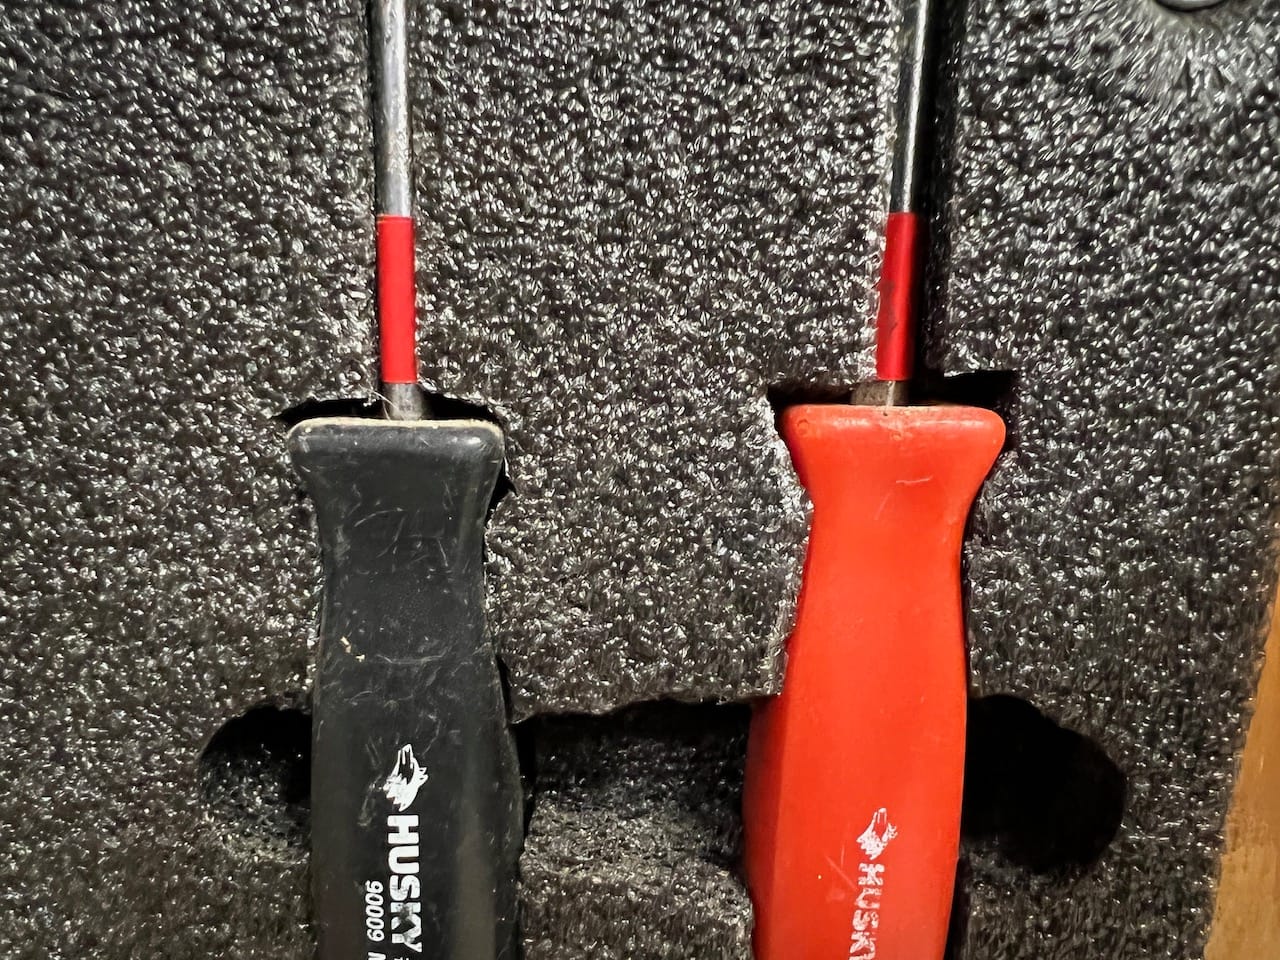 FastCap GPS Tape in red on screwdrivers.